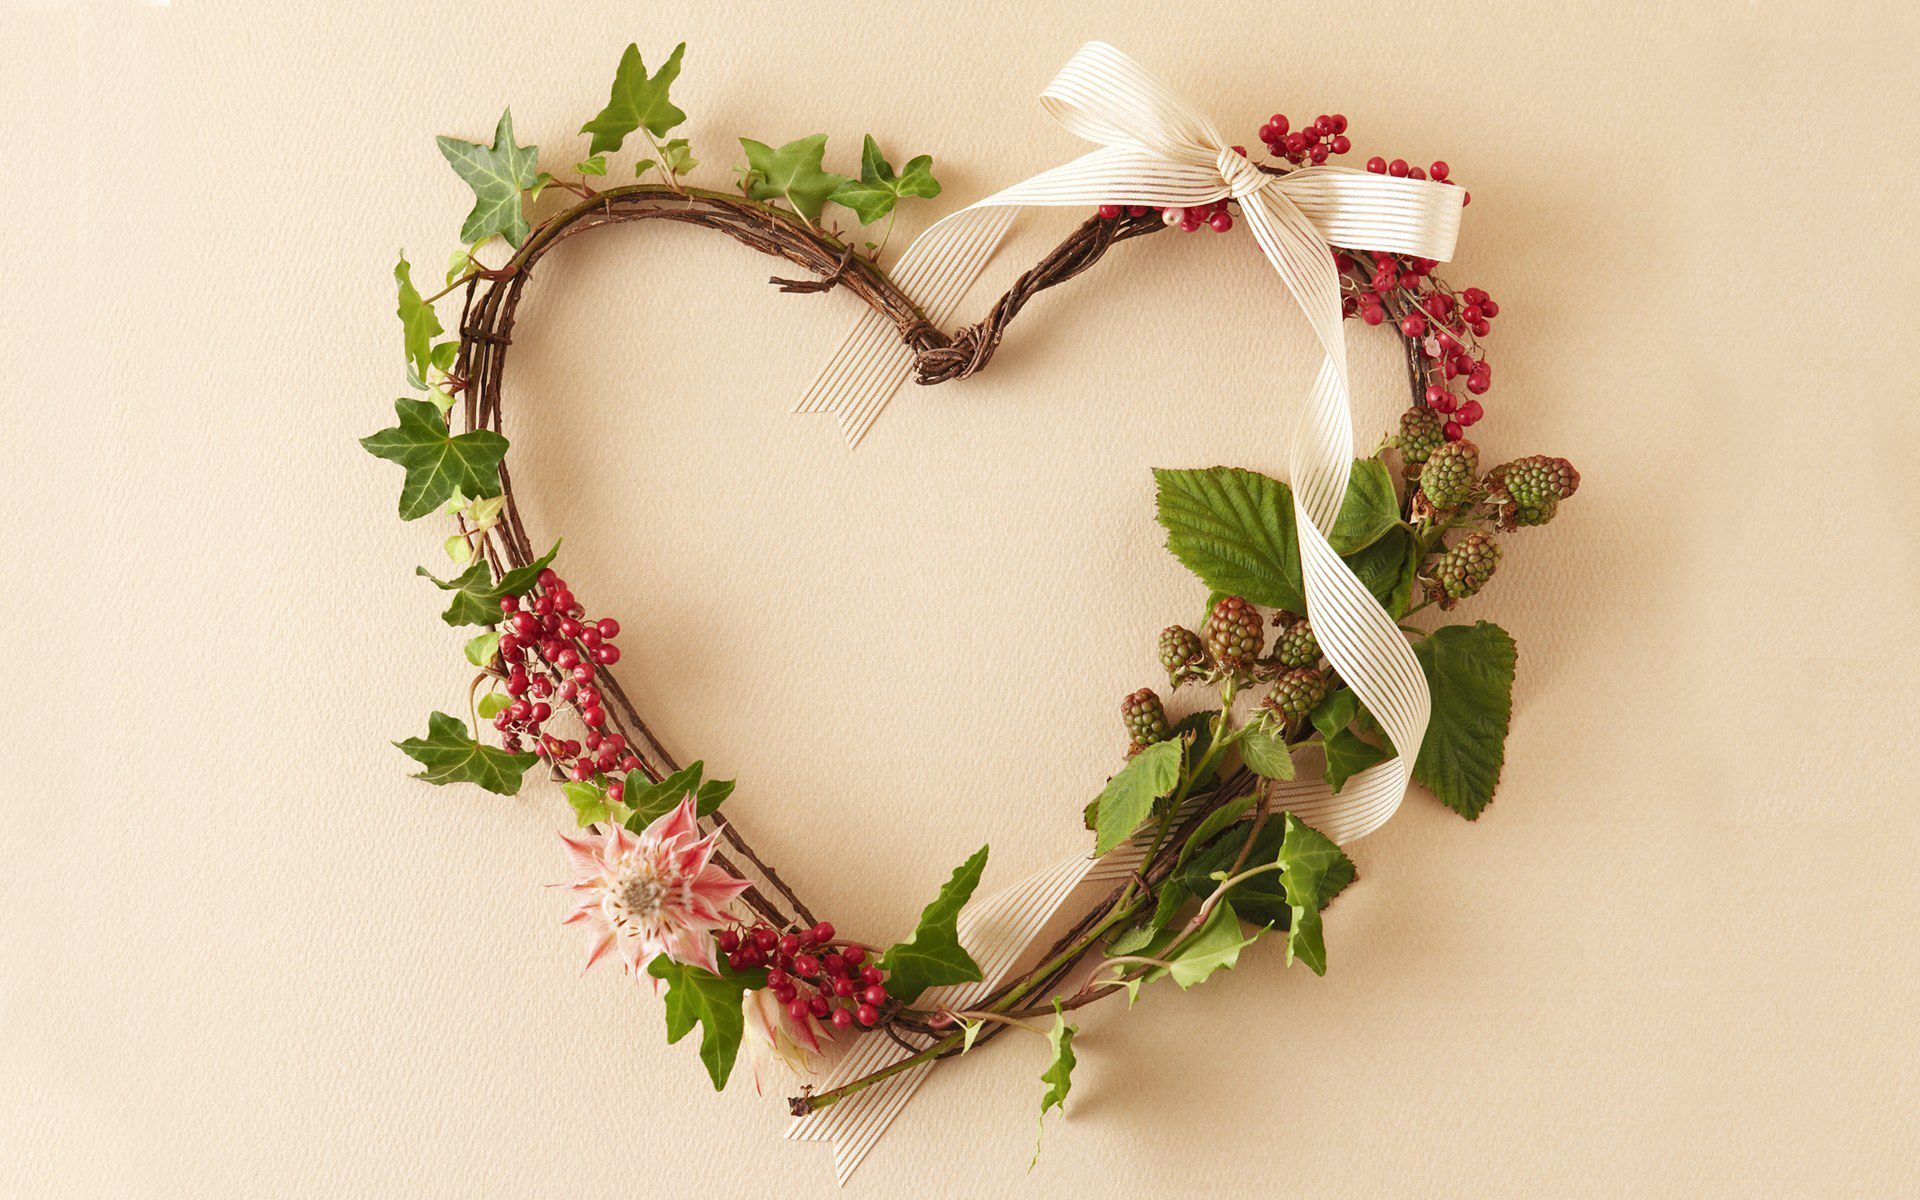 tape, plants, flowers, love, berries, branches, wreath, stems